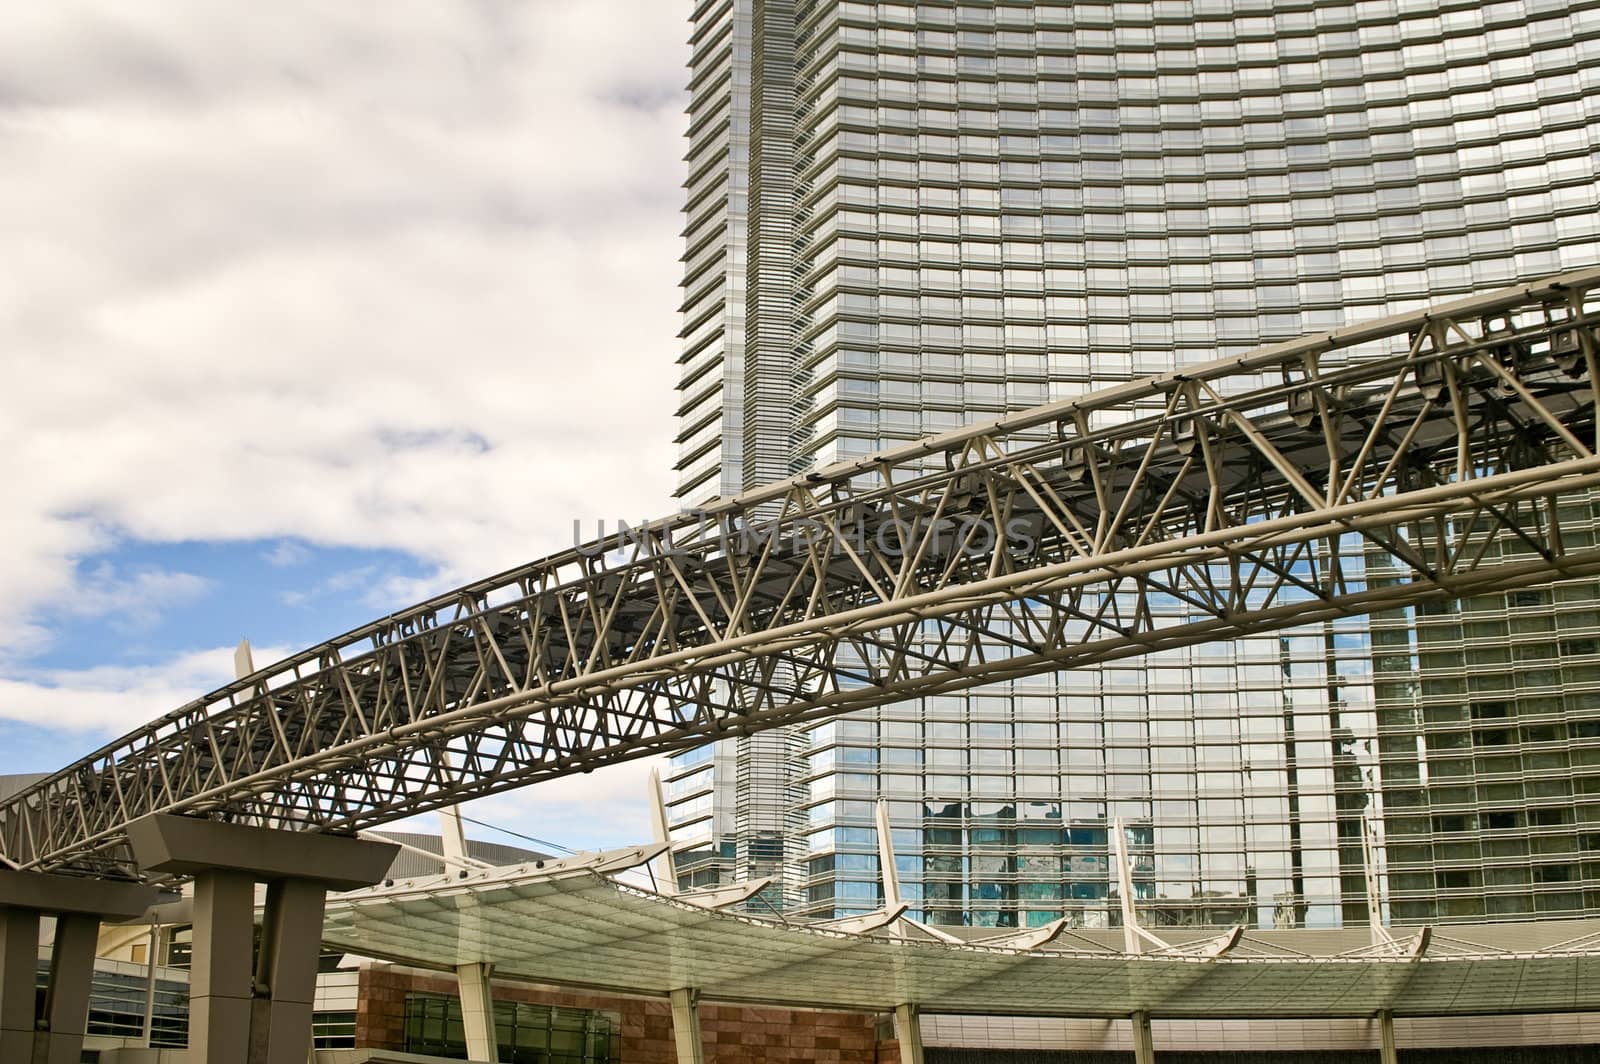 Monorail track through heart of Las Vegas on cloudy day